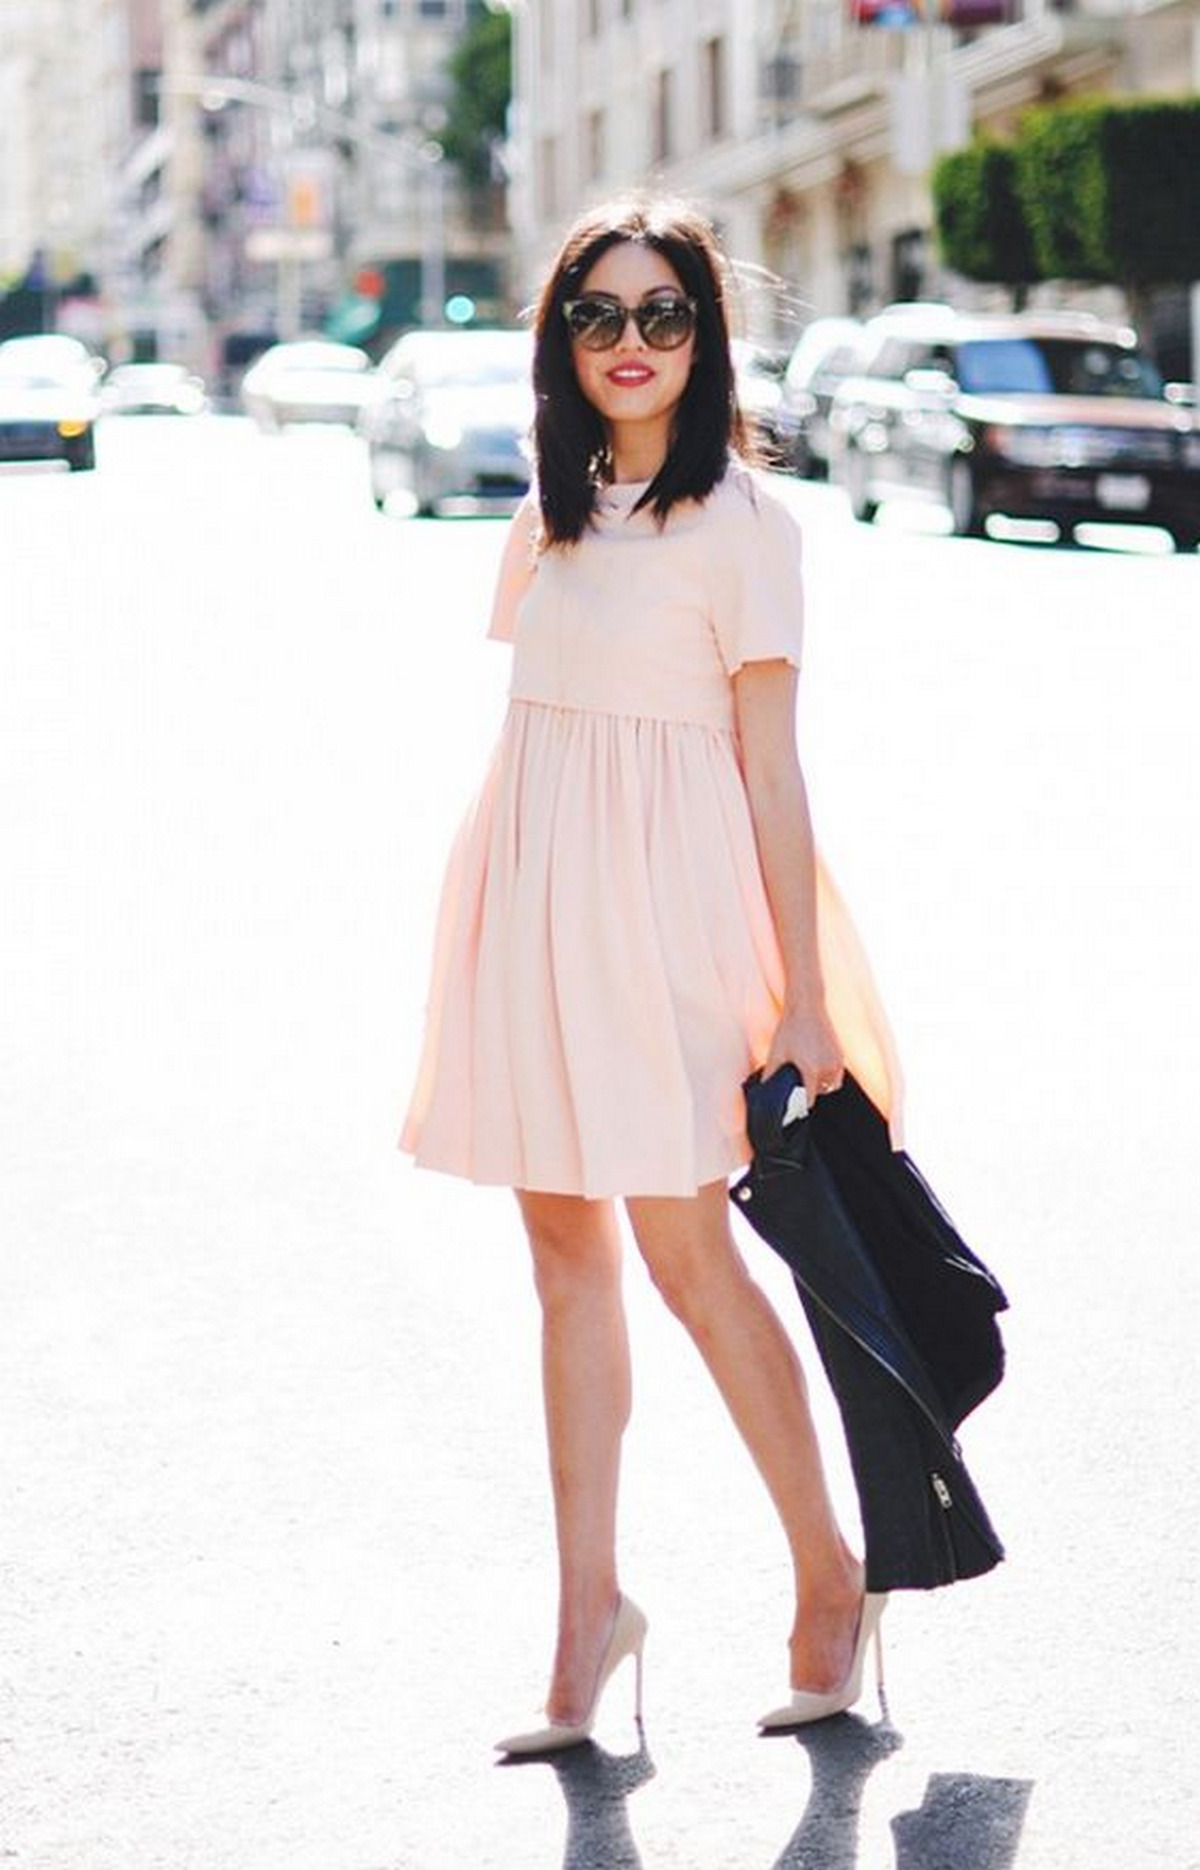 Baby Doll Dress and High Heel Point-Toe Pumps 